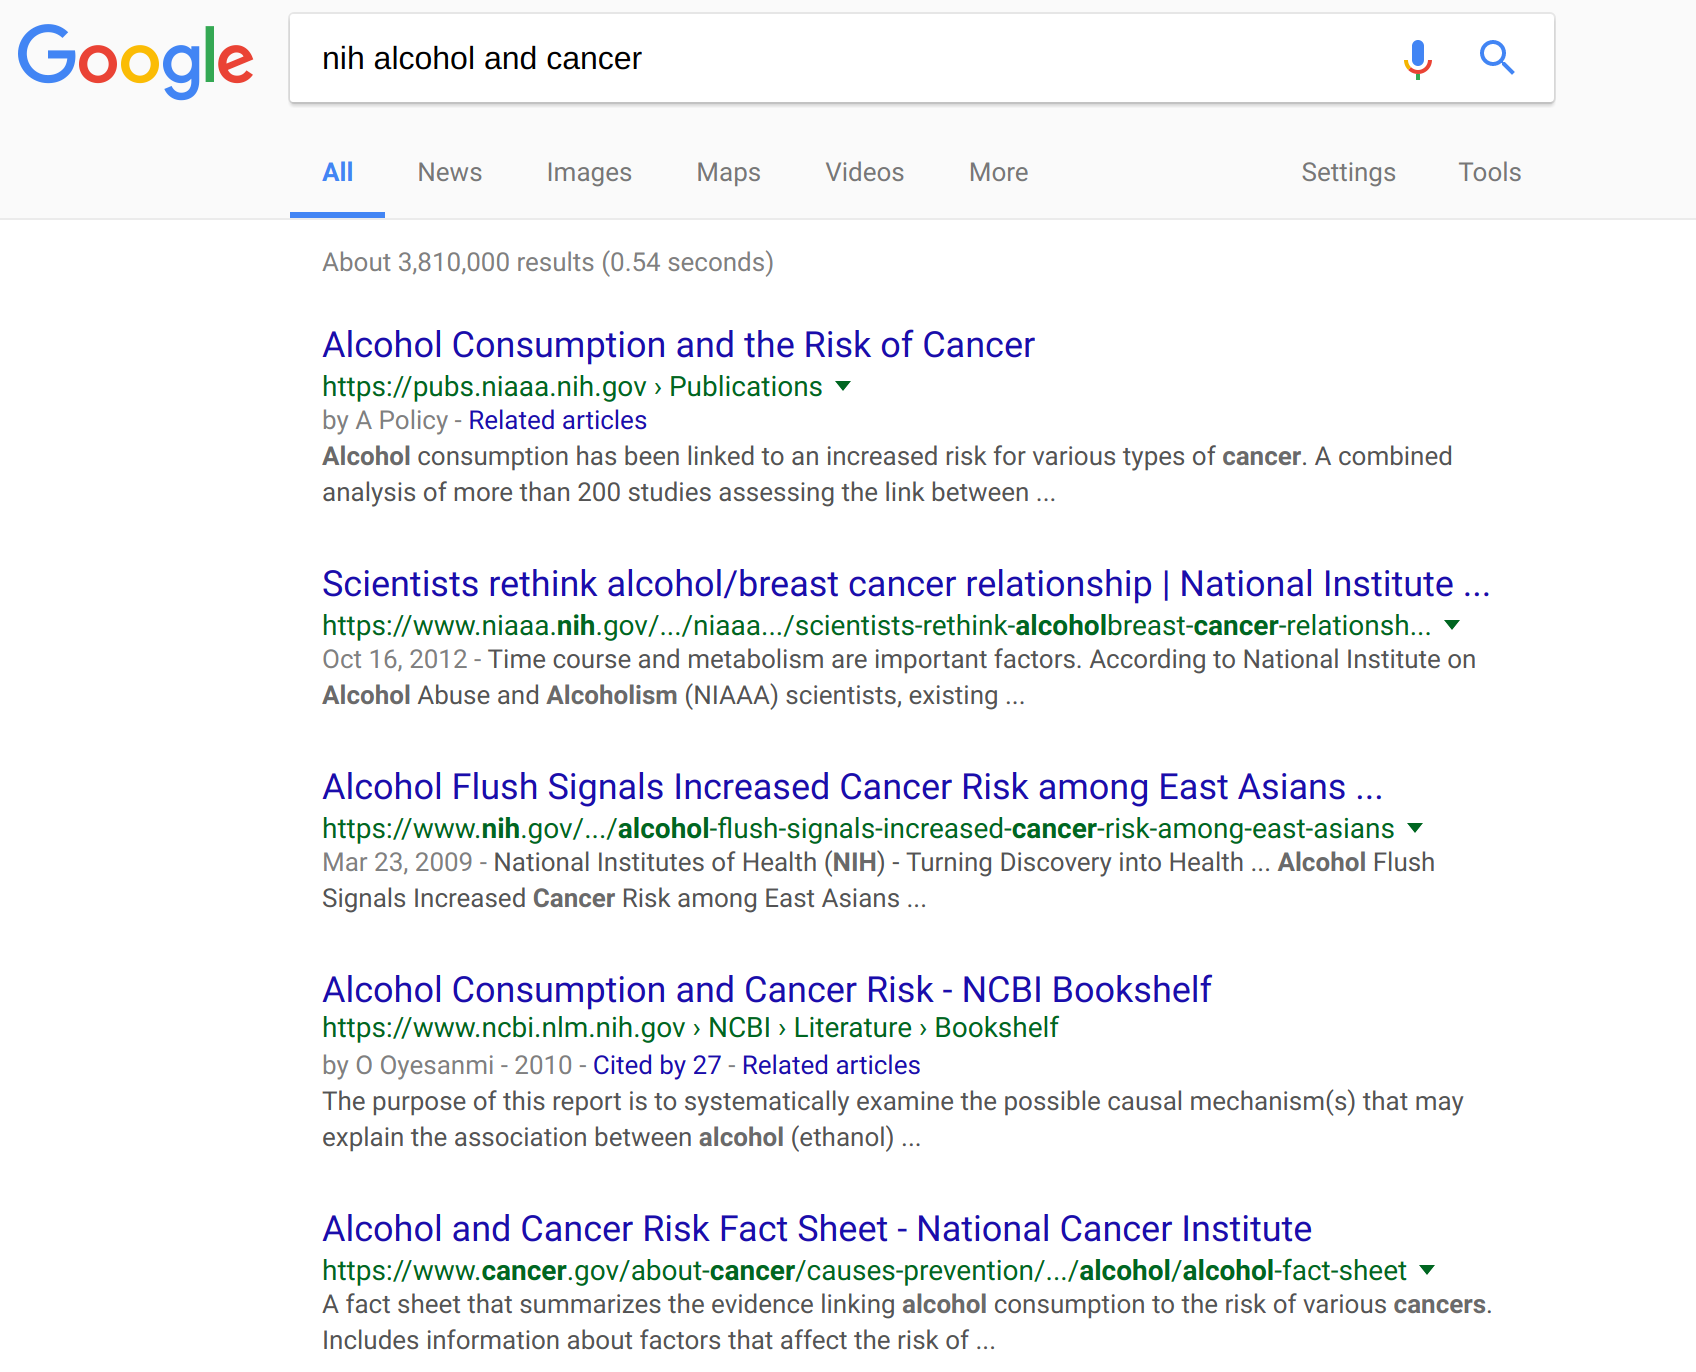 The Google search result for “nih alcohol and cancer.” The fifth result from the NIH is described as “A fact sheet that summarizes the evidence linking alcohol consumption to the risk of various cancers…”